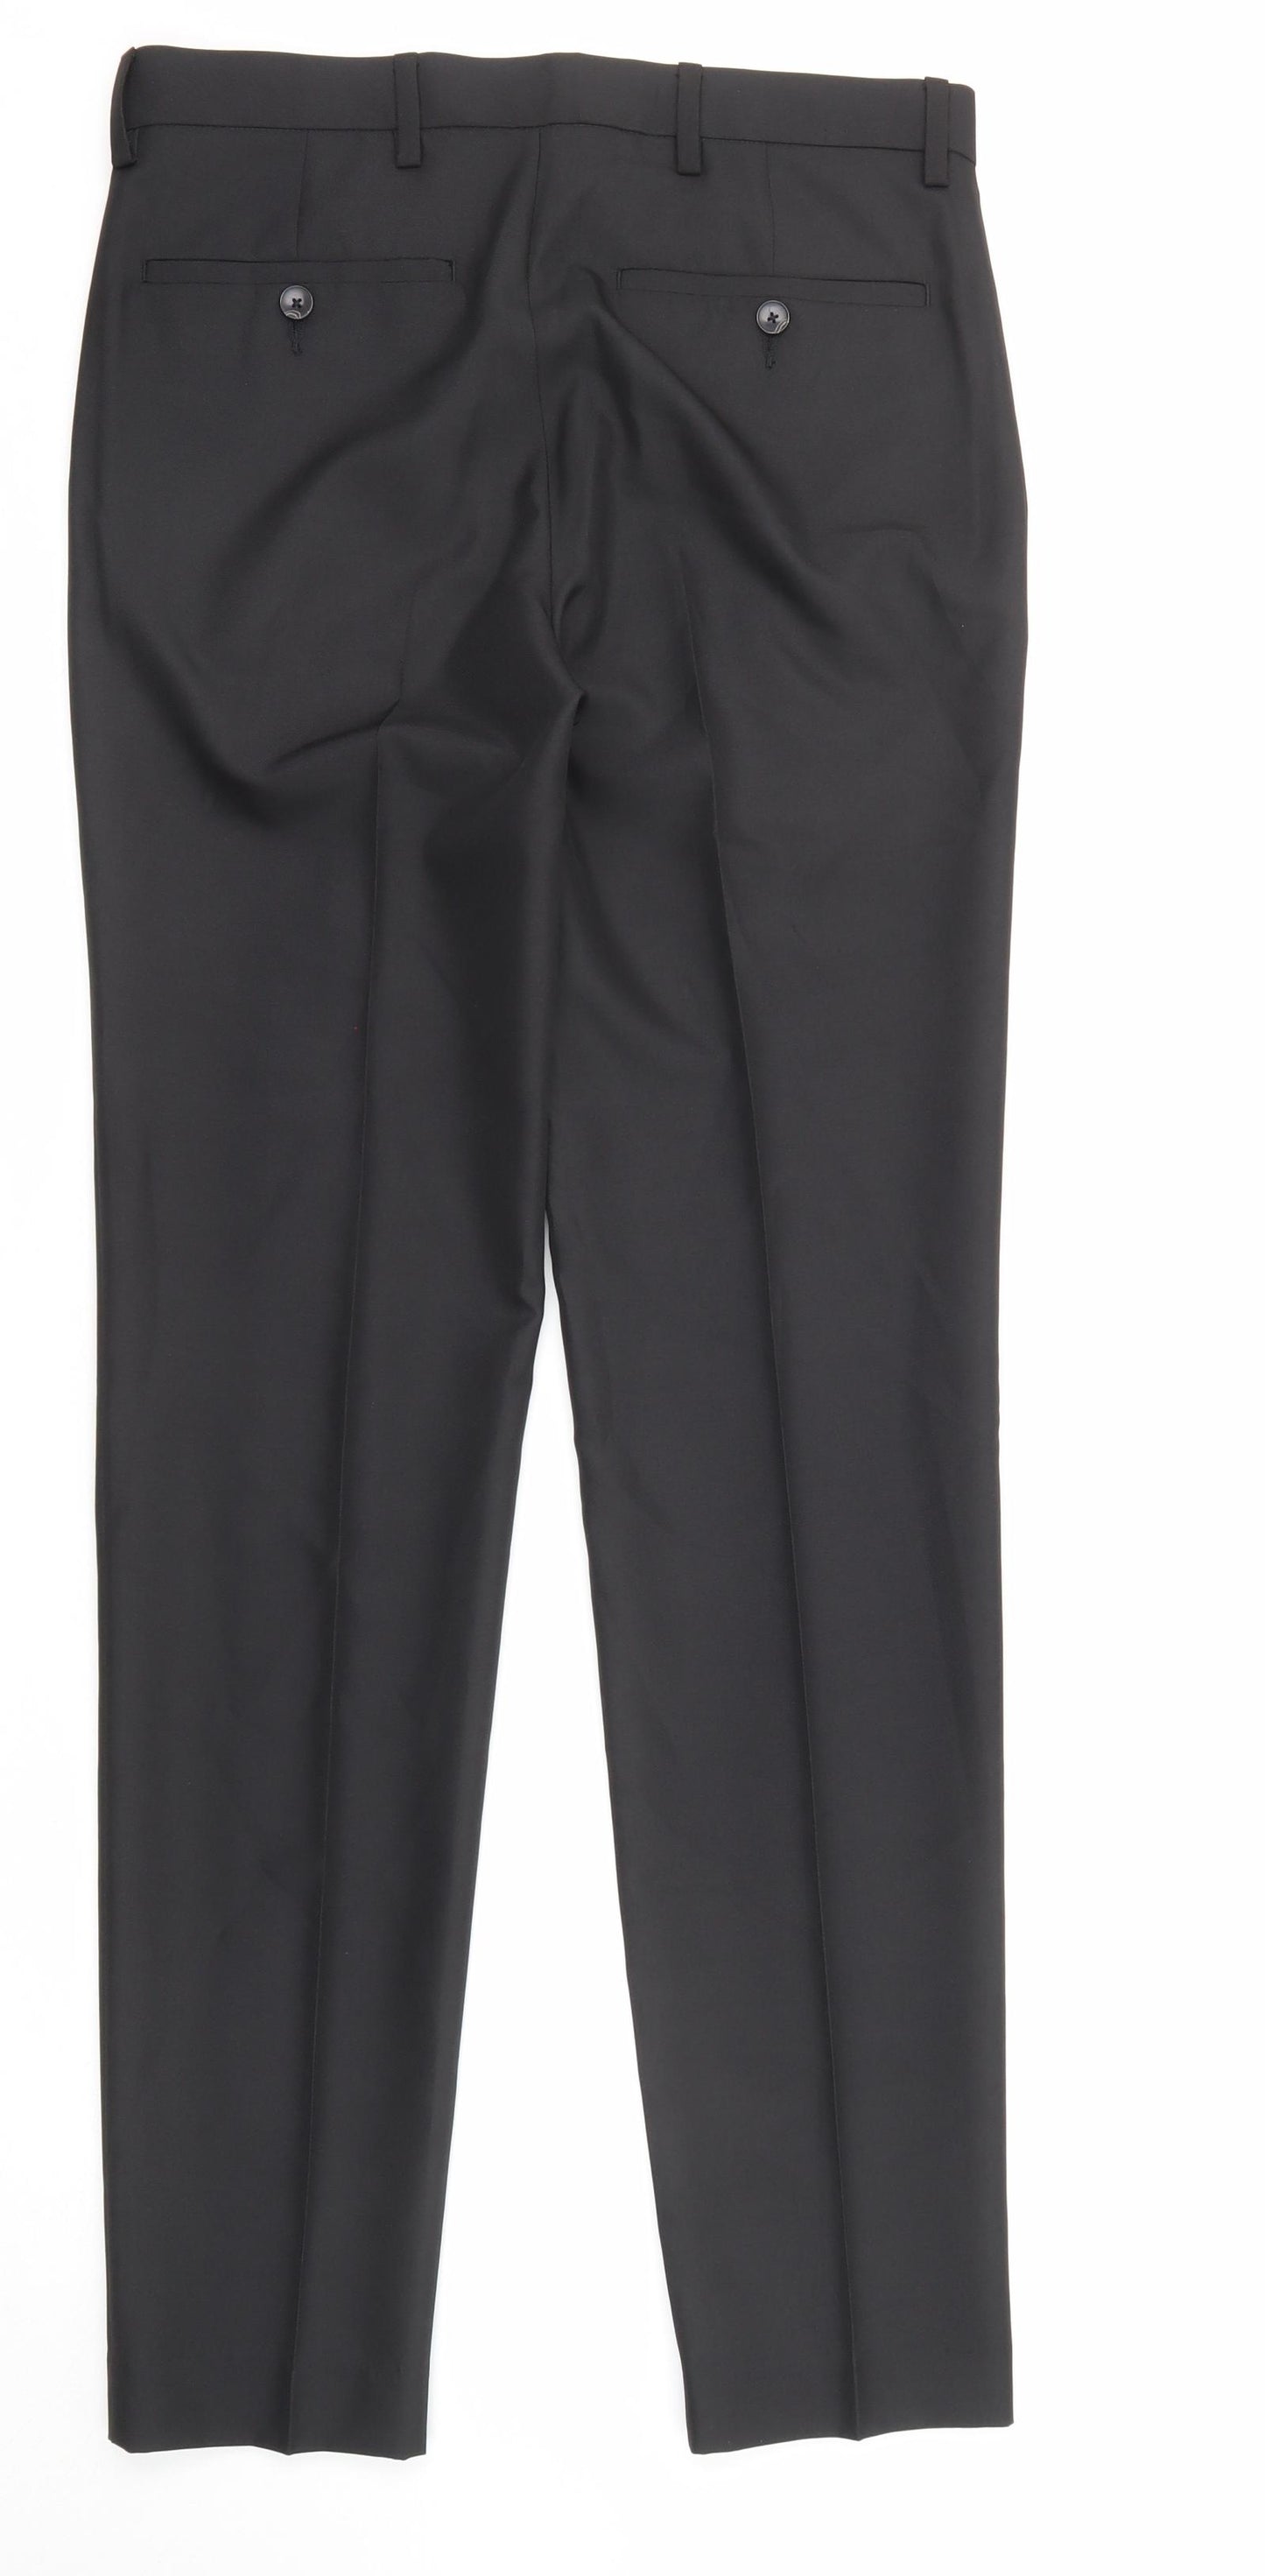 Marks and Spencer Mens Black Polyester Dress Pants Trousers Size 30 in L33 in Regular Zip